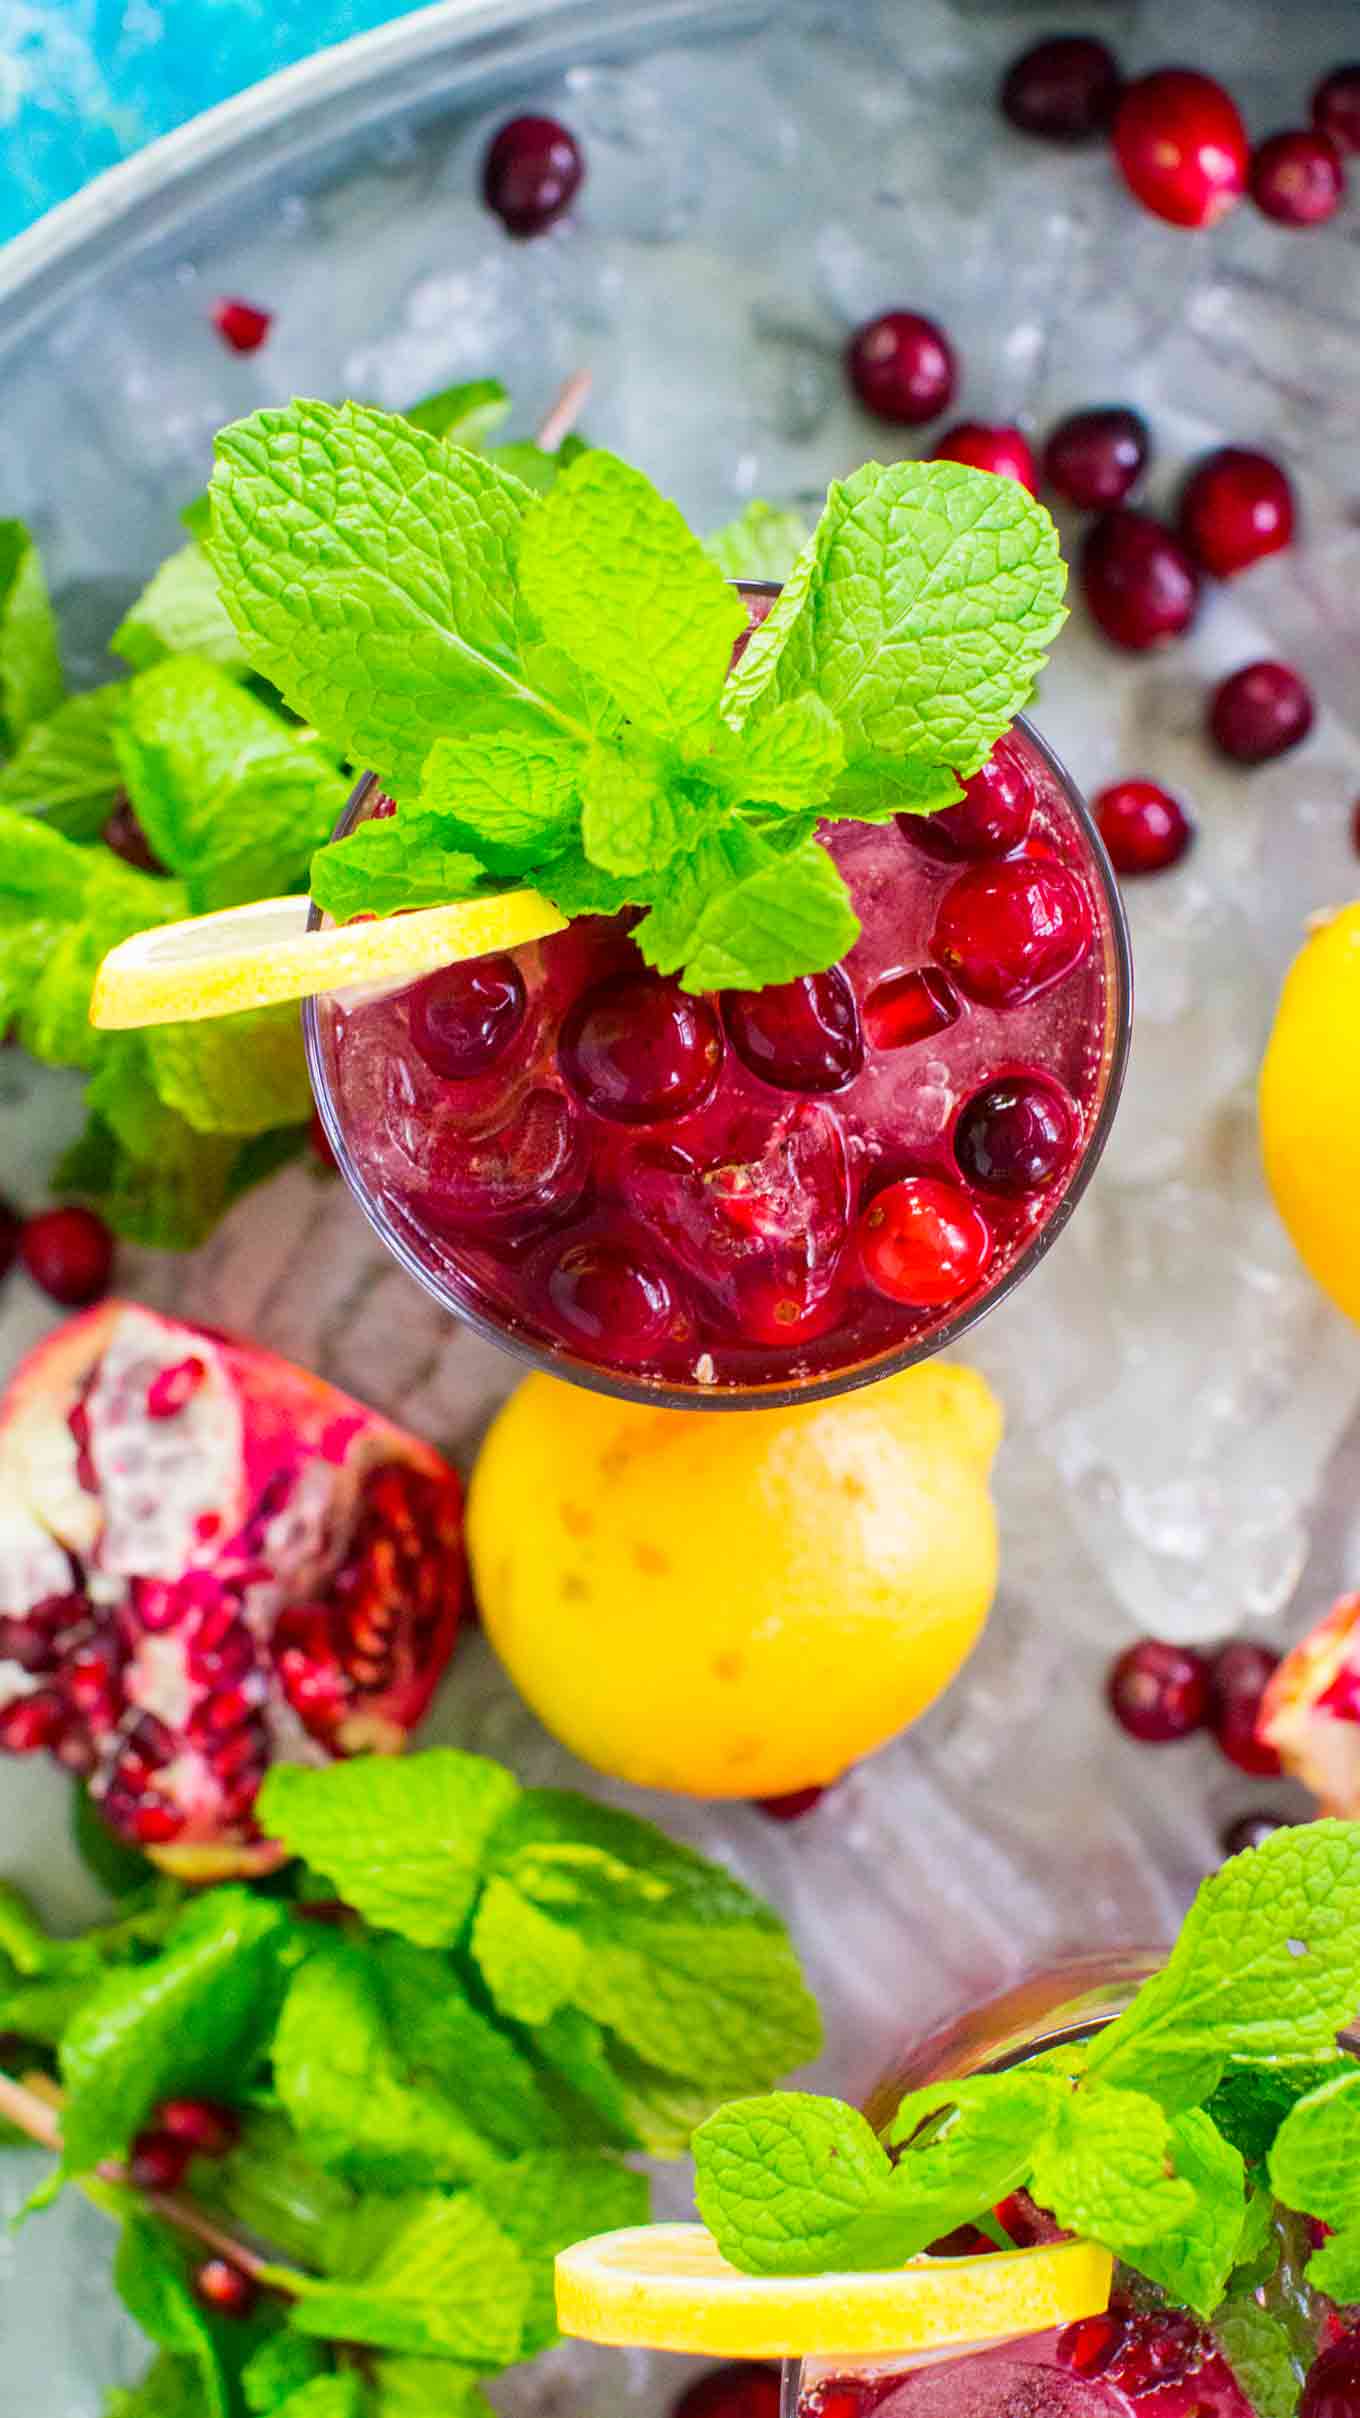 Easy Cranberry Mocktail is the perfect fall drink, sweet and refreshing, can also be made ahead of time for your Thanksgiving feast.